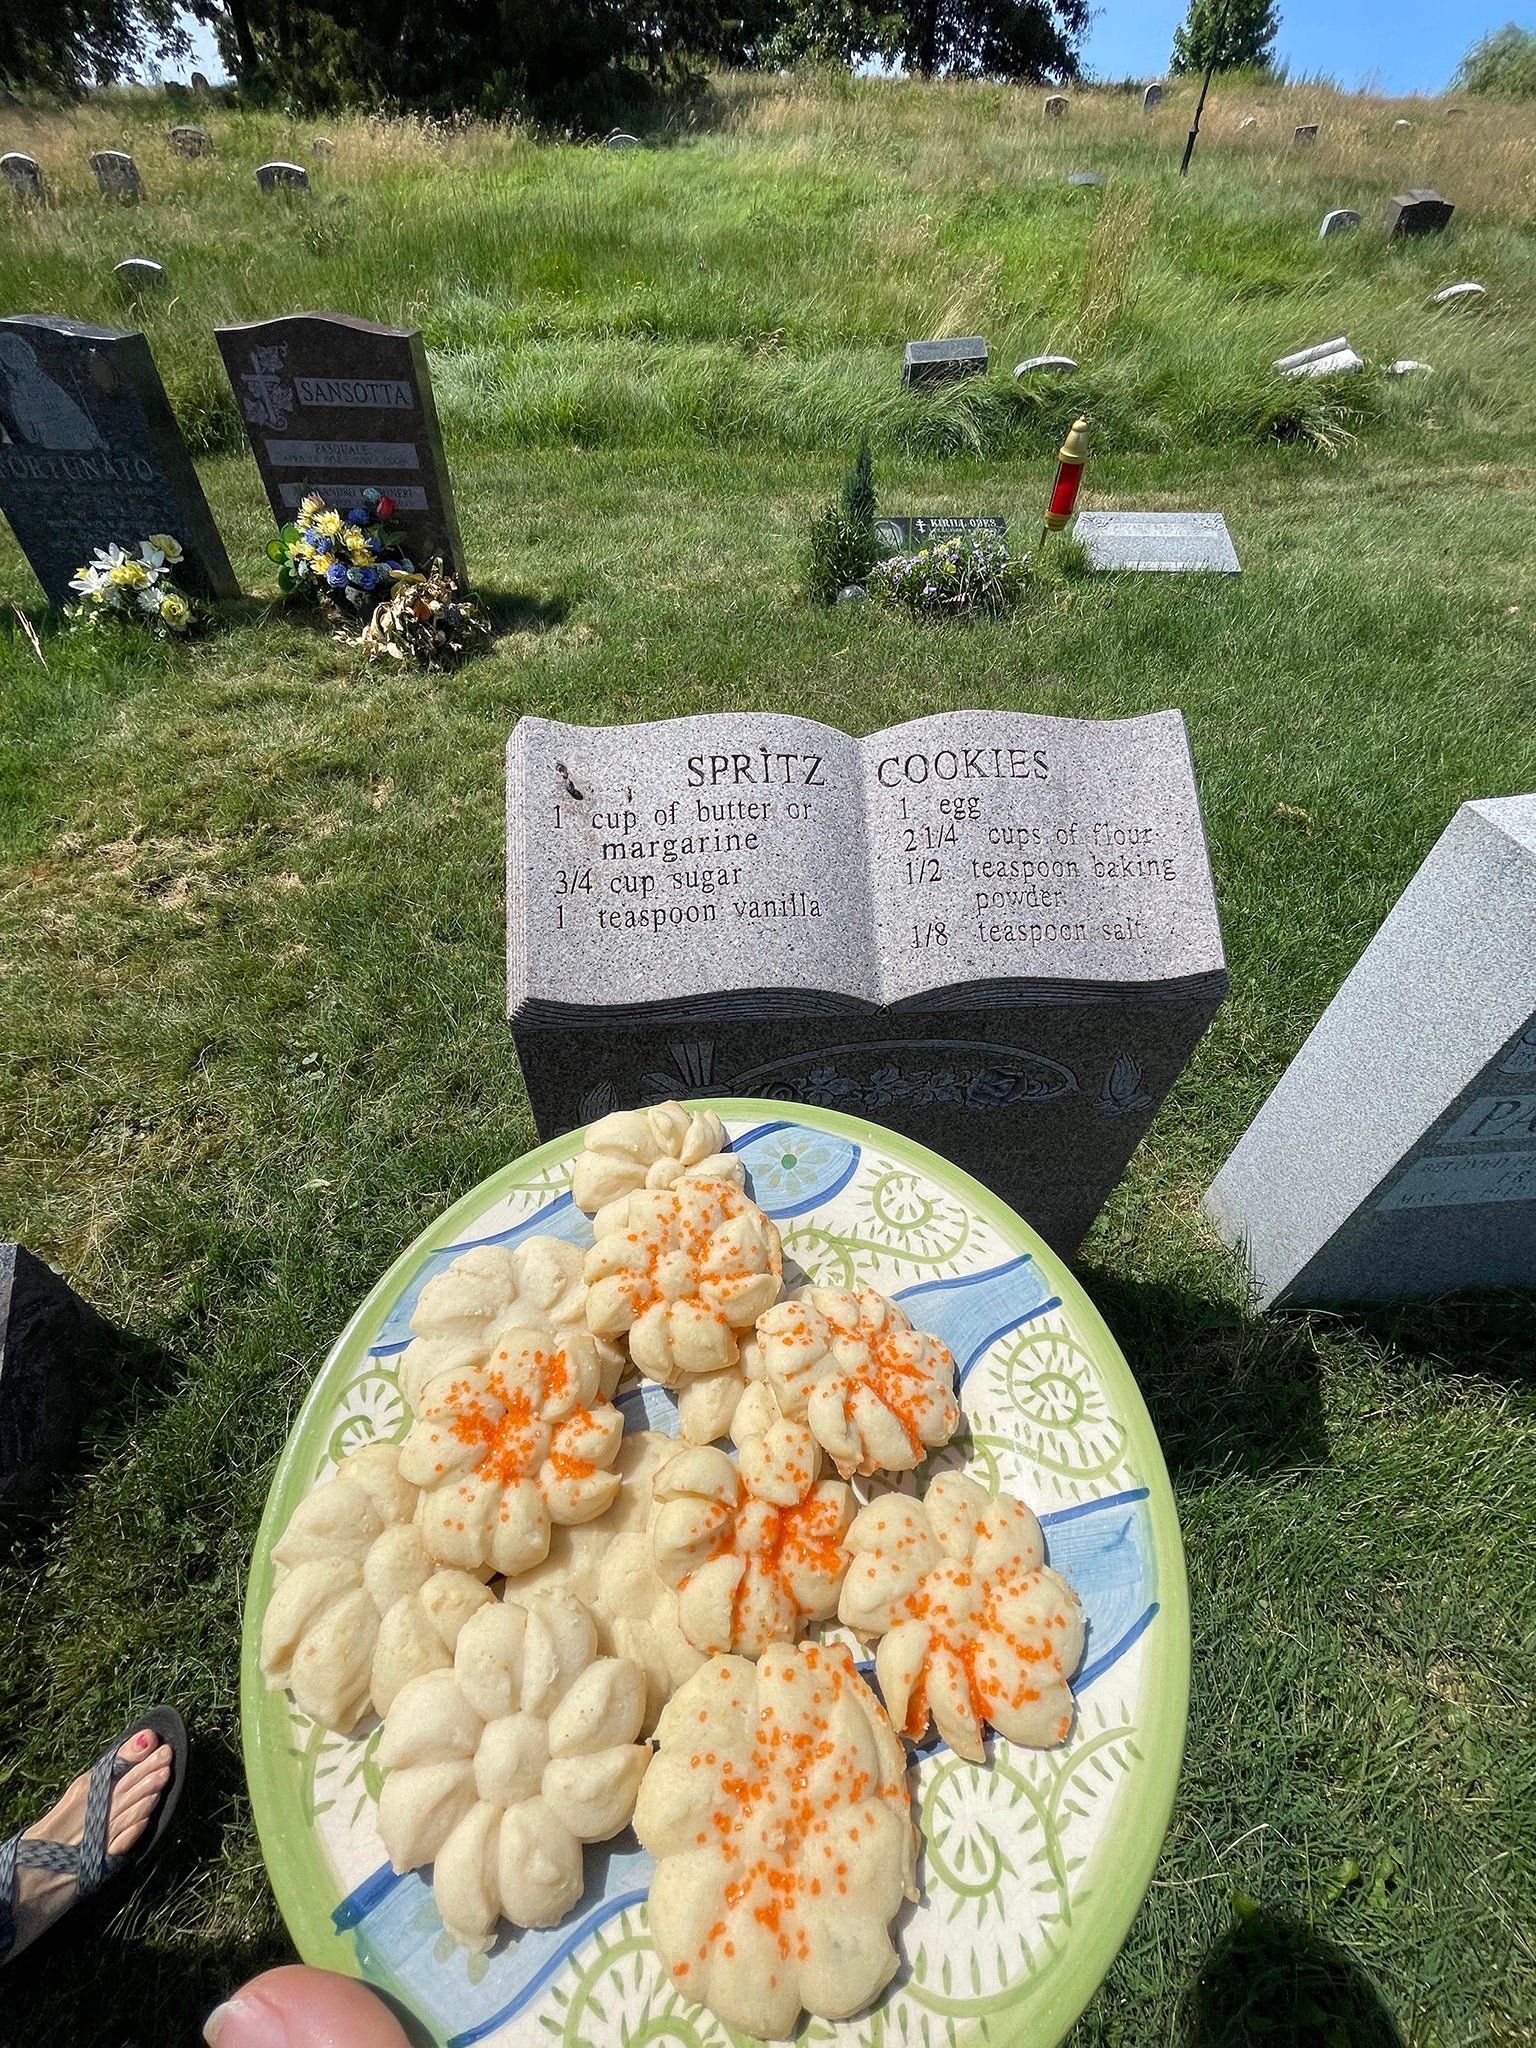 Naomi Odessa Miller-Dawson’s gravestone is shaped like an open cookbook and shares a recipe for spritz cookies